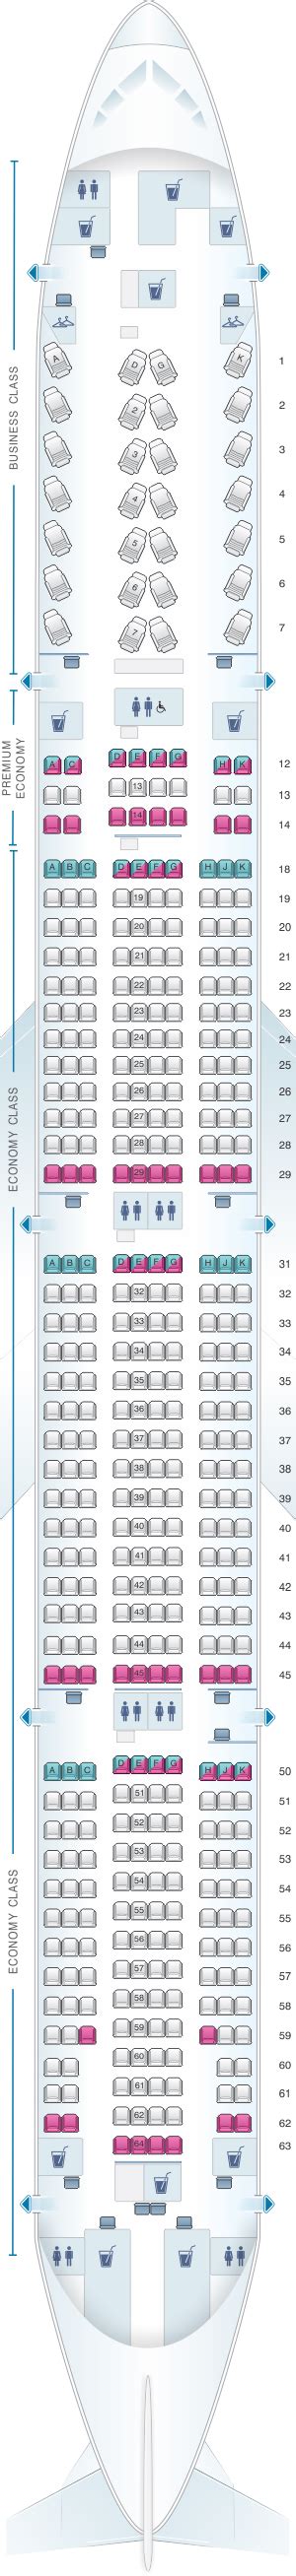 Seating Chart Boeing 777 300er Air Canada Elcho Table